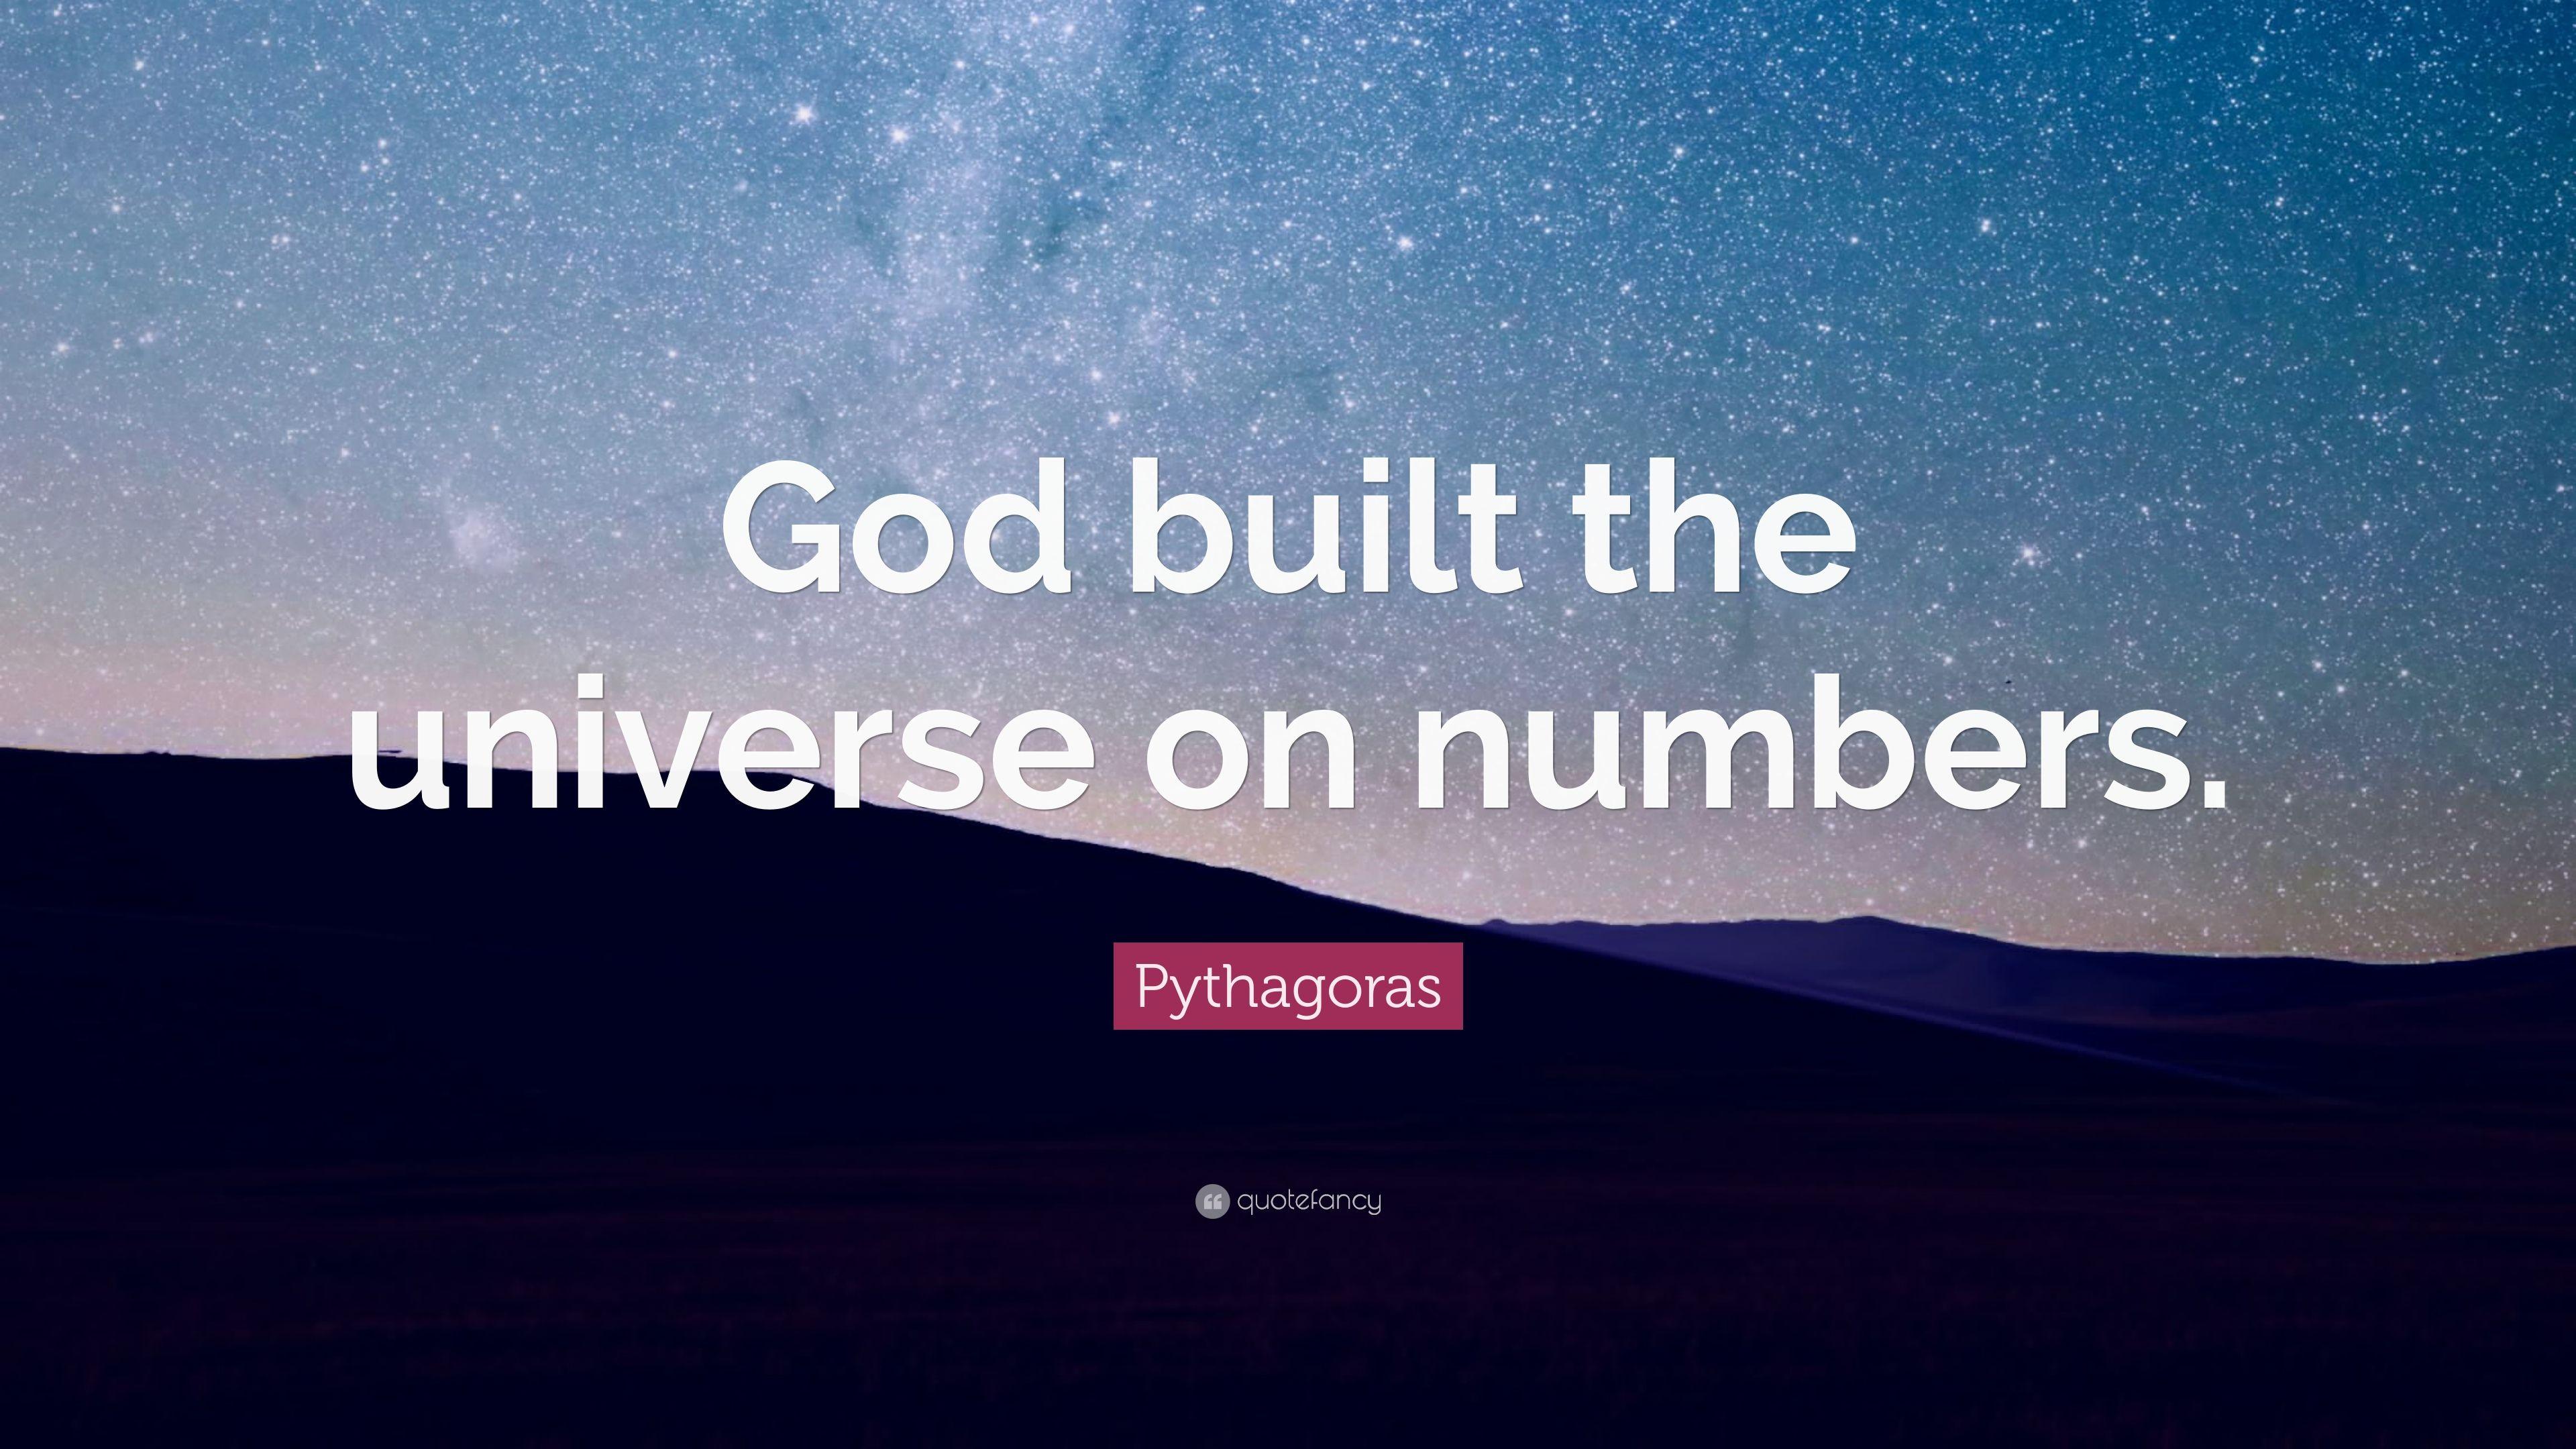 Pythagoras Quote: “God built the universe on numbers.” 12